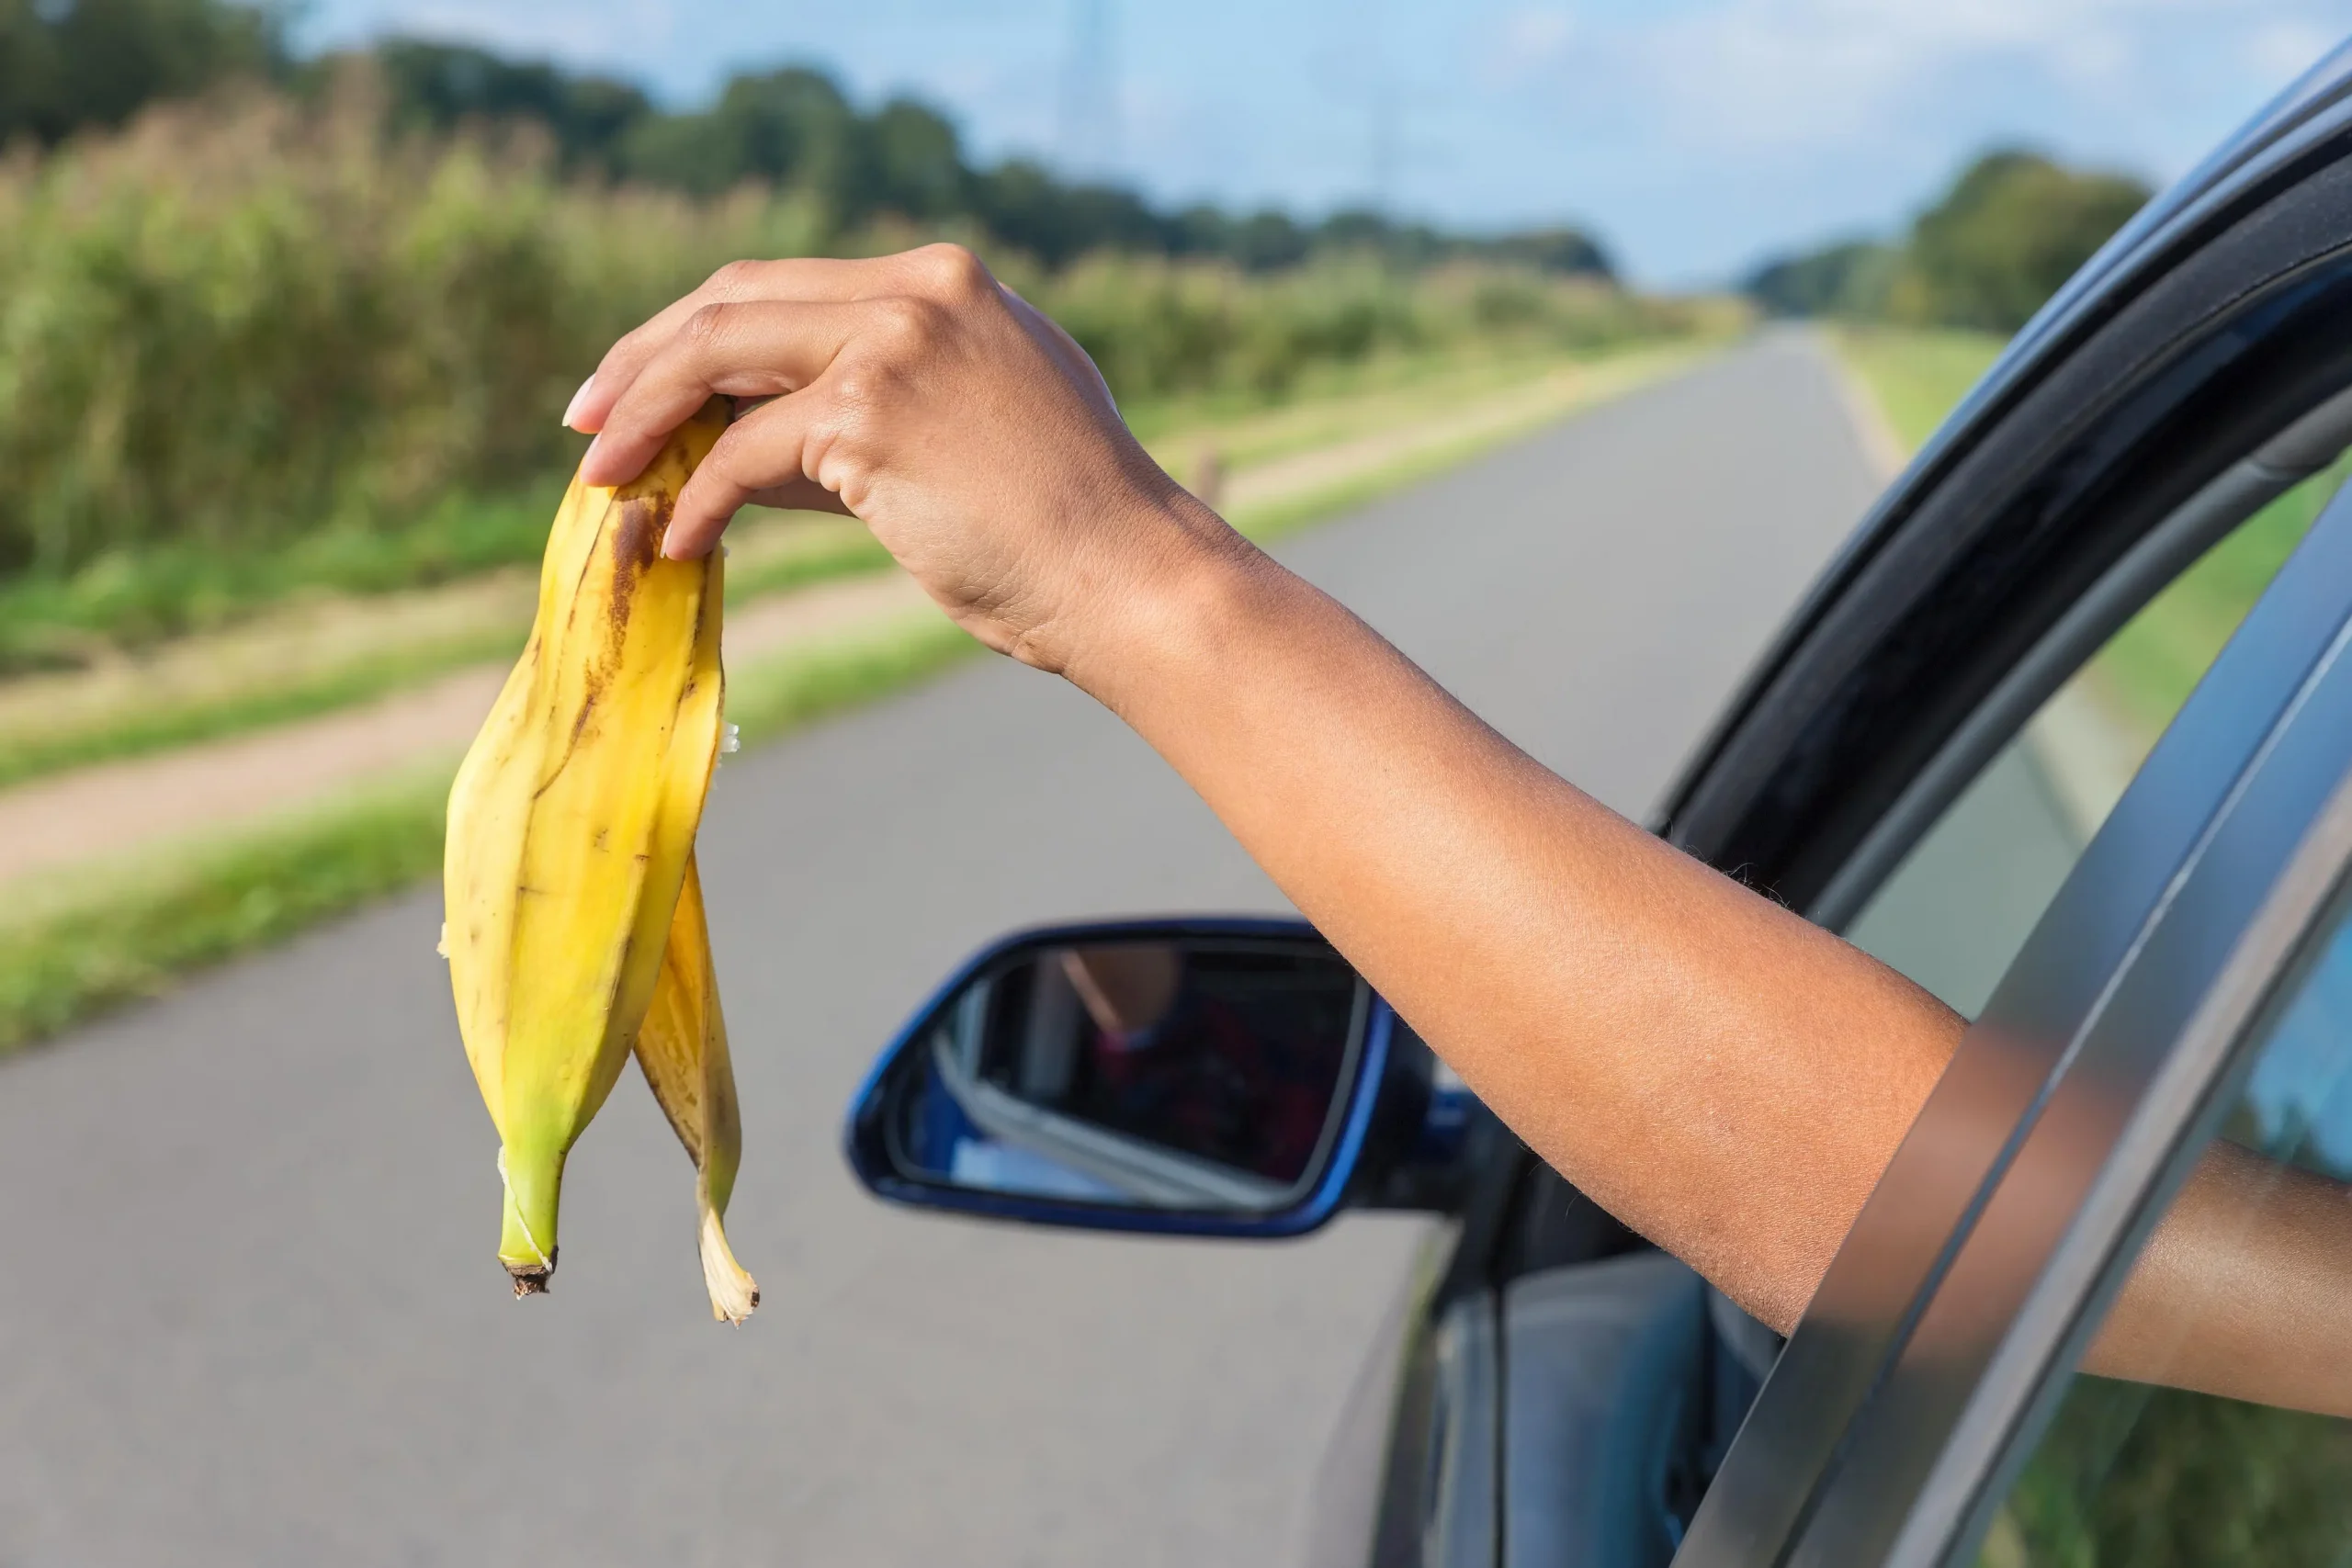 A person in a car throwing a banana on the road